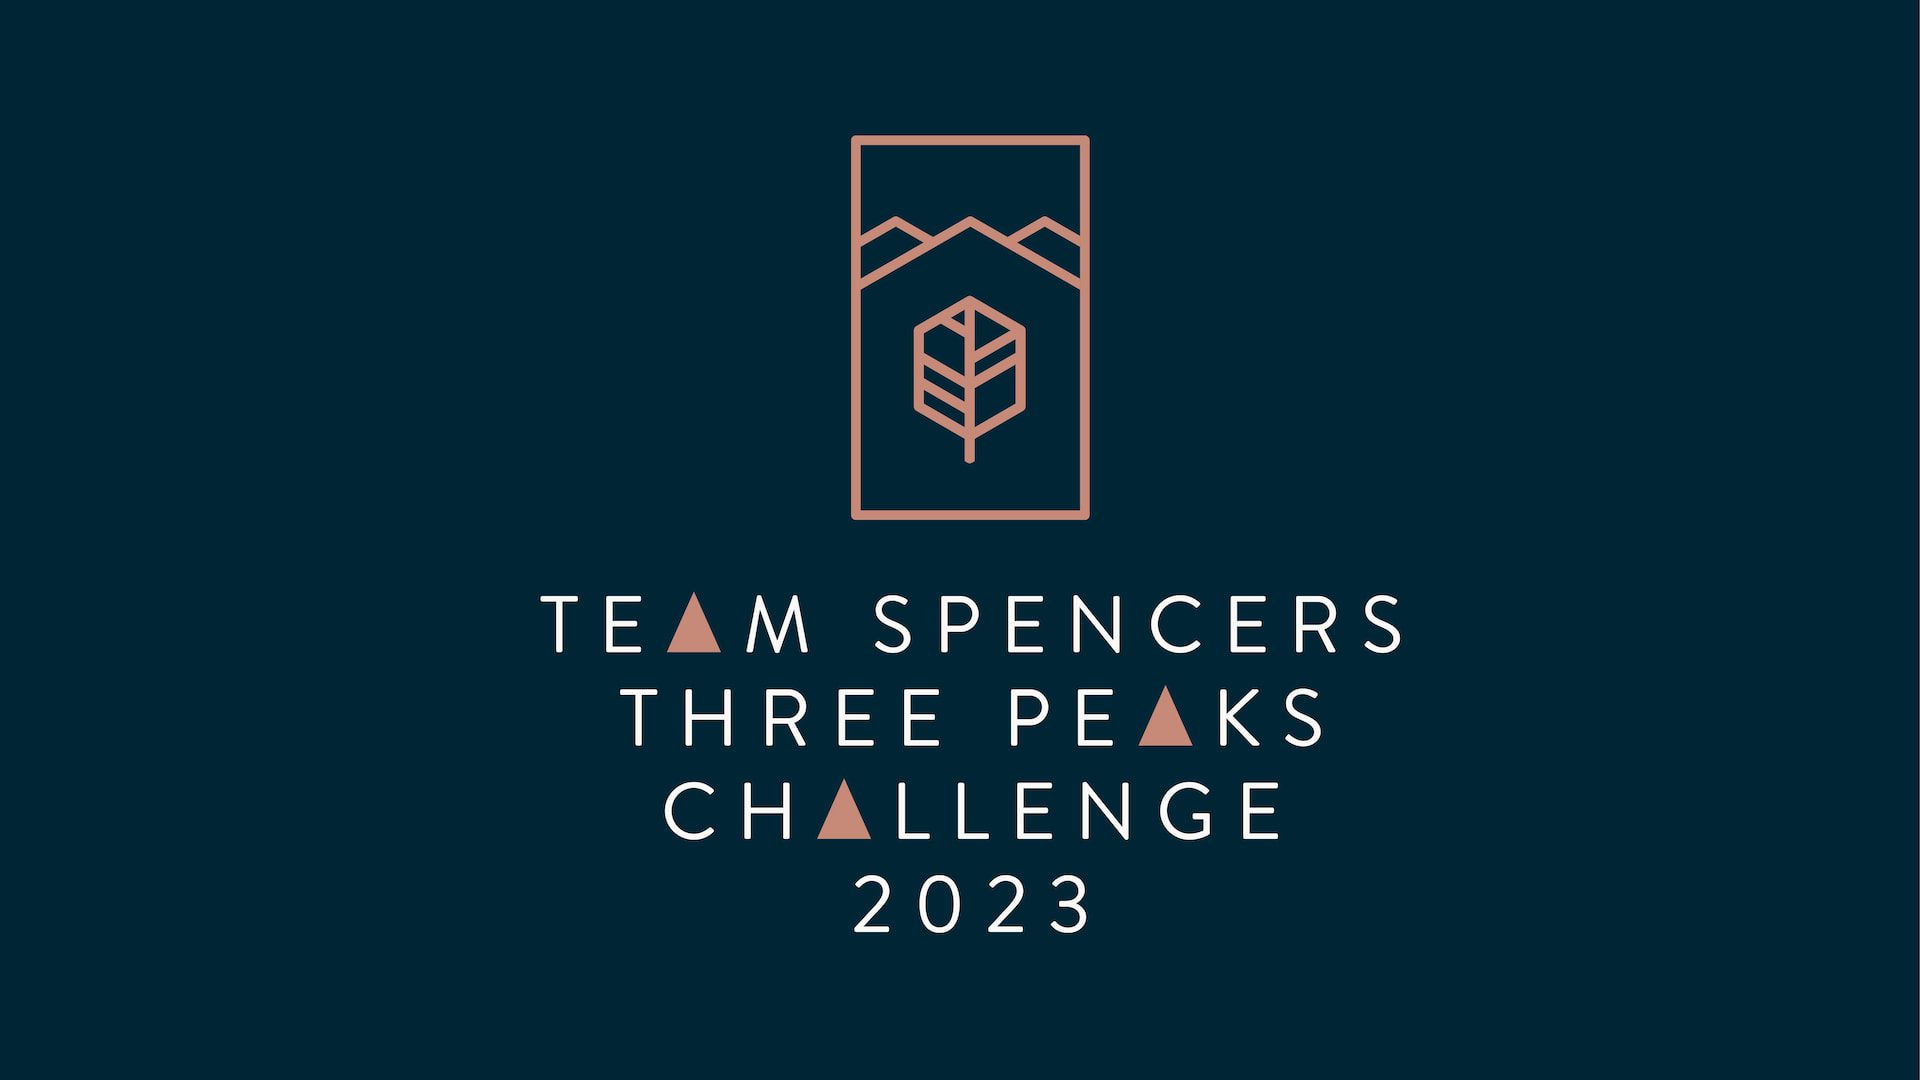 SPENCERS LAUNCH THREE PEAKS CHALLENGE IN MEMORY OF COLLEAGUE